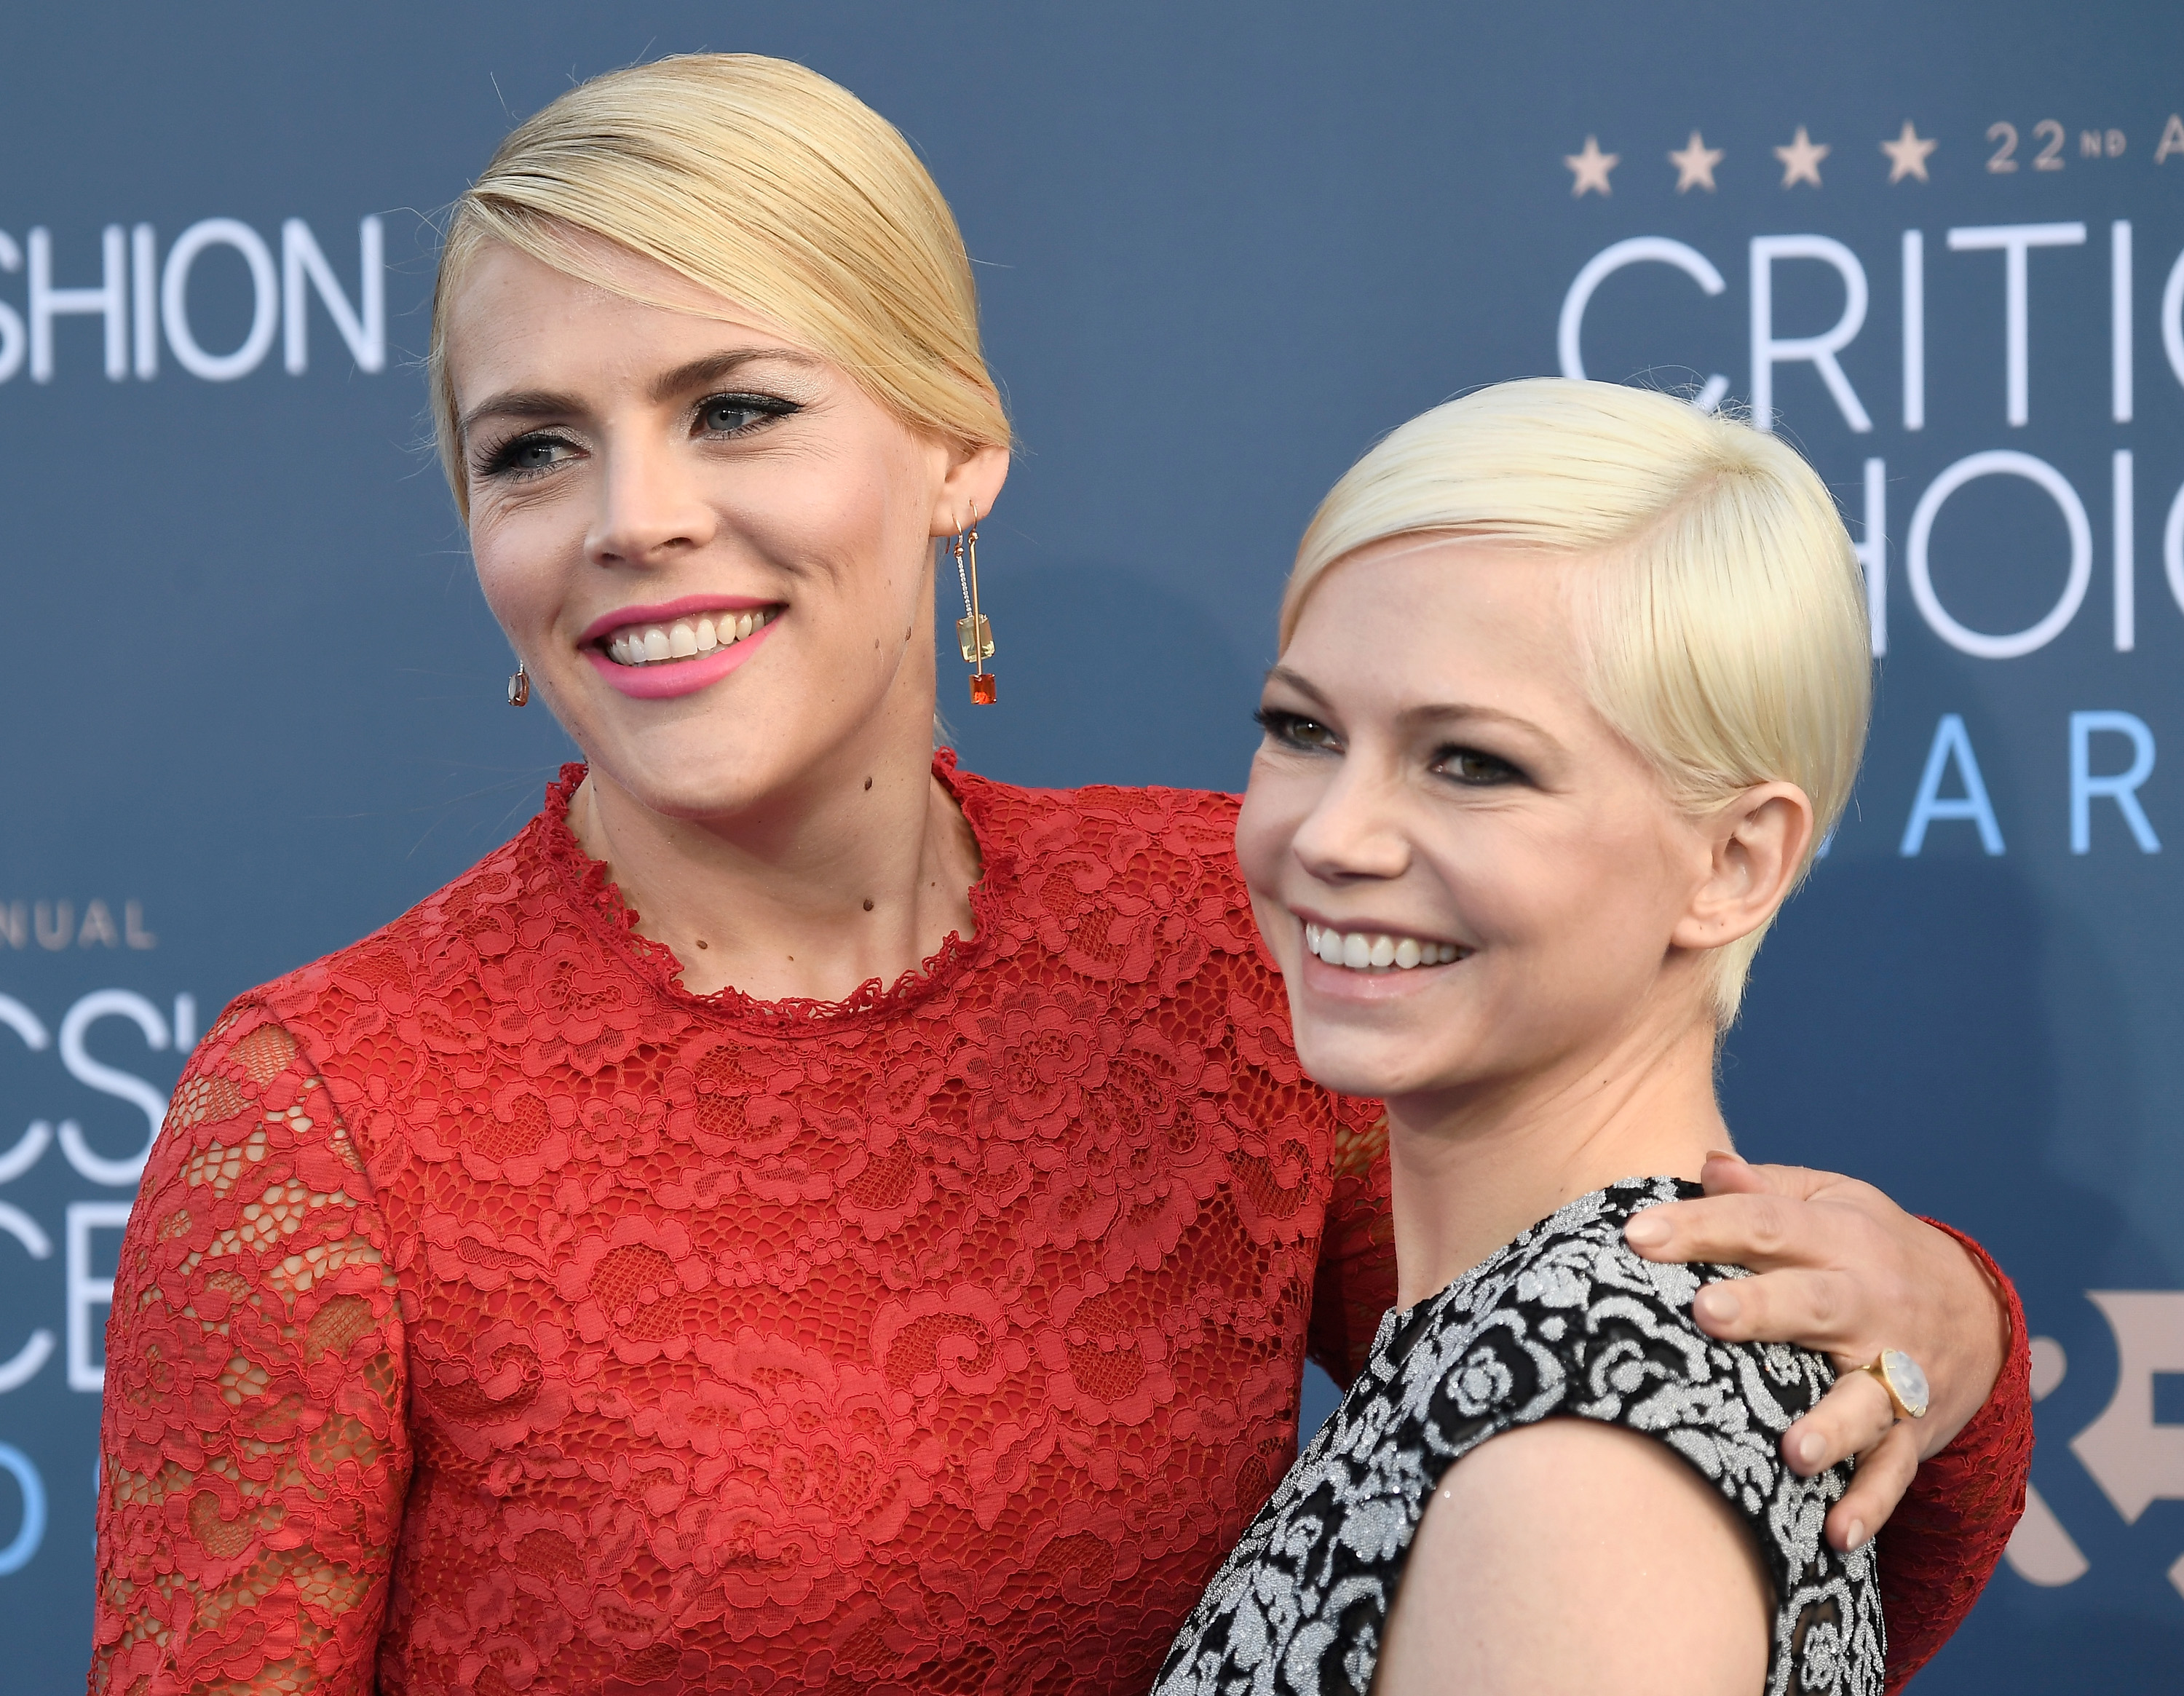 Busy Philipps (L) and Michelle Williams attend The 22nd Annual Critics' Choice Awards on December 11, 2016 in Santa Monica, California.  